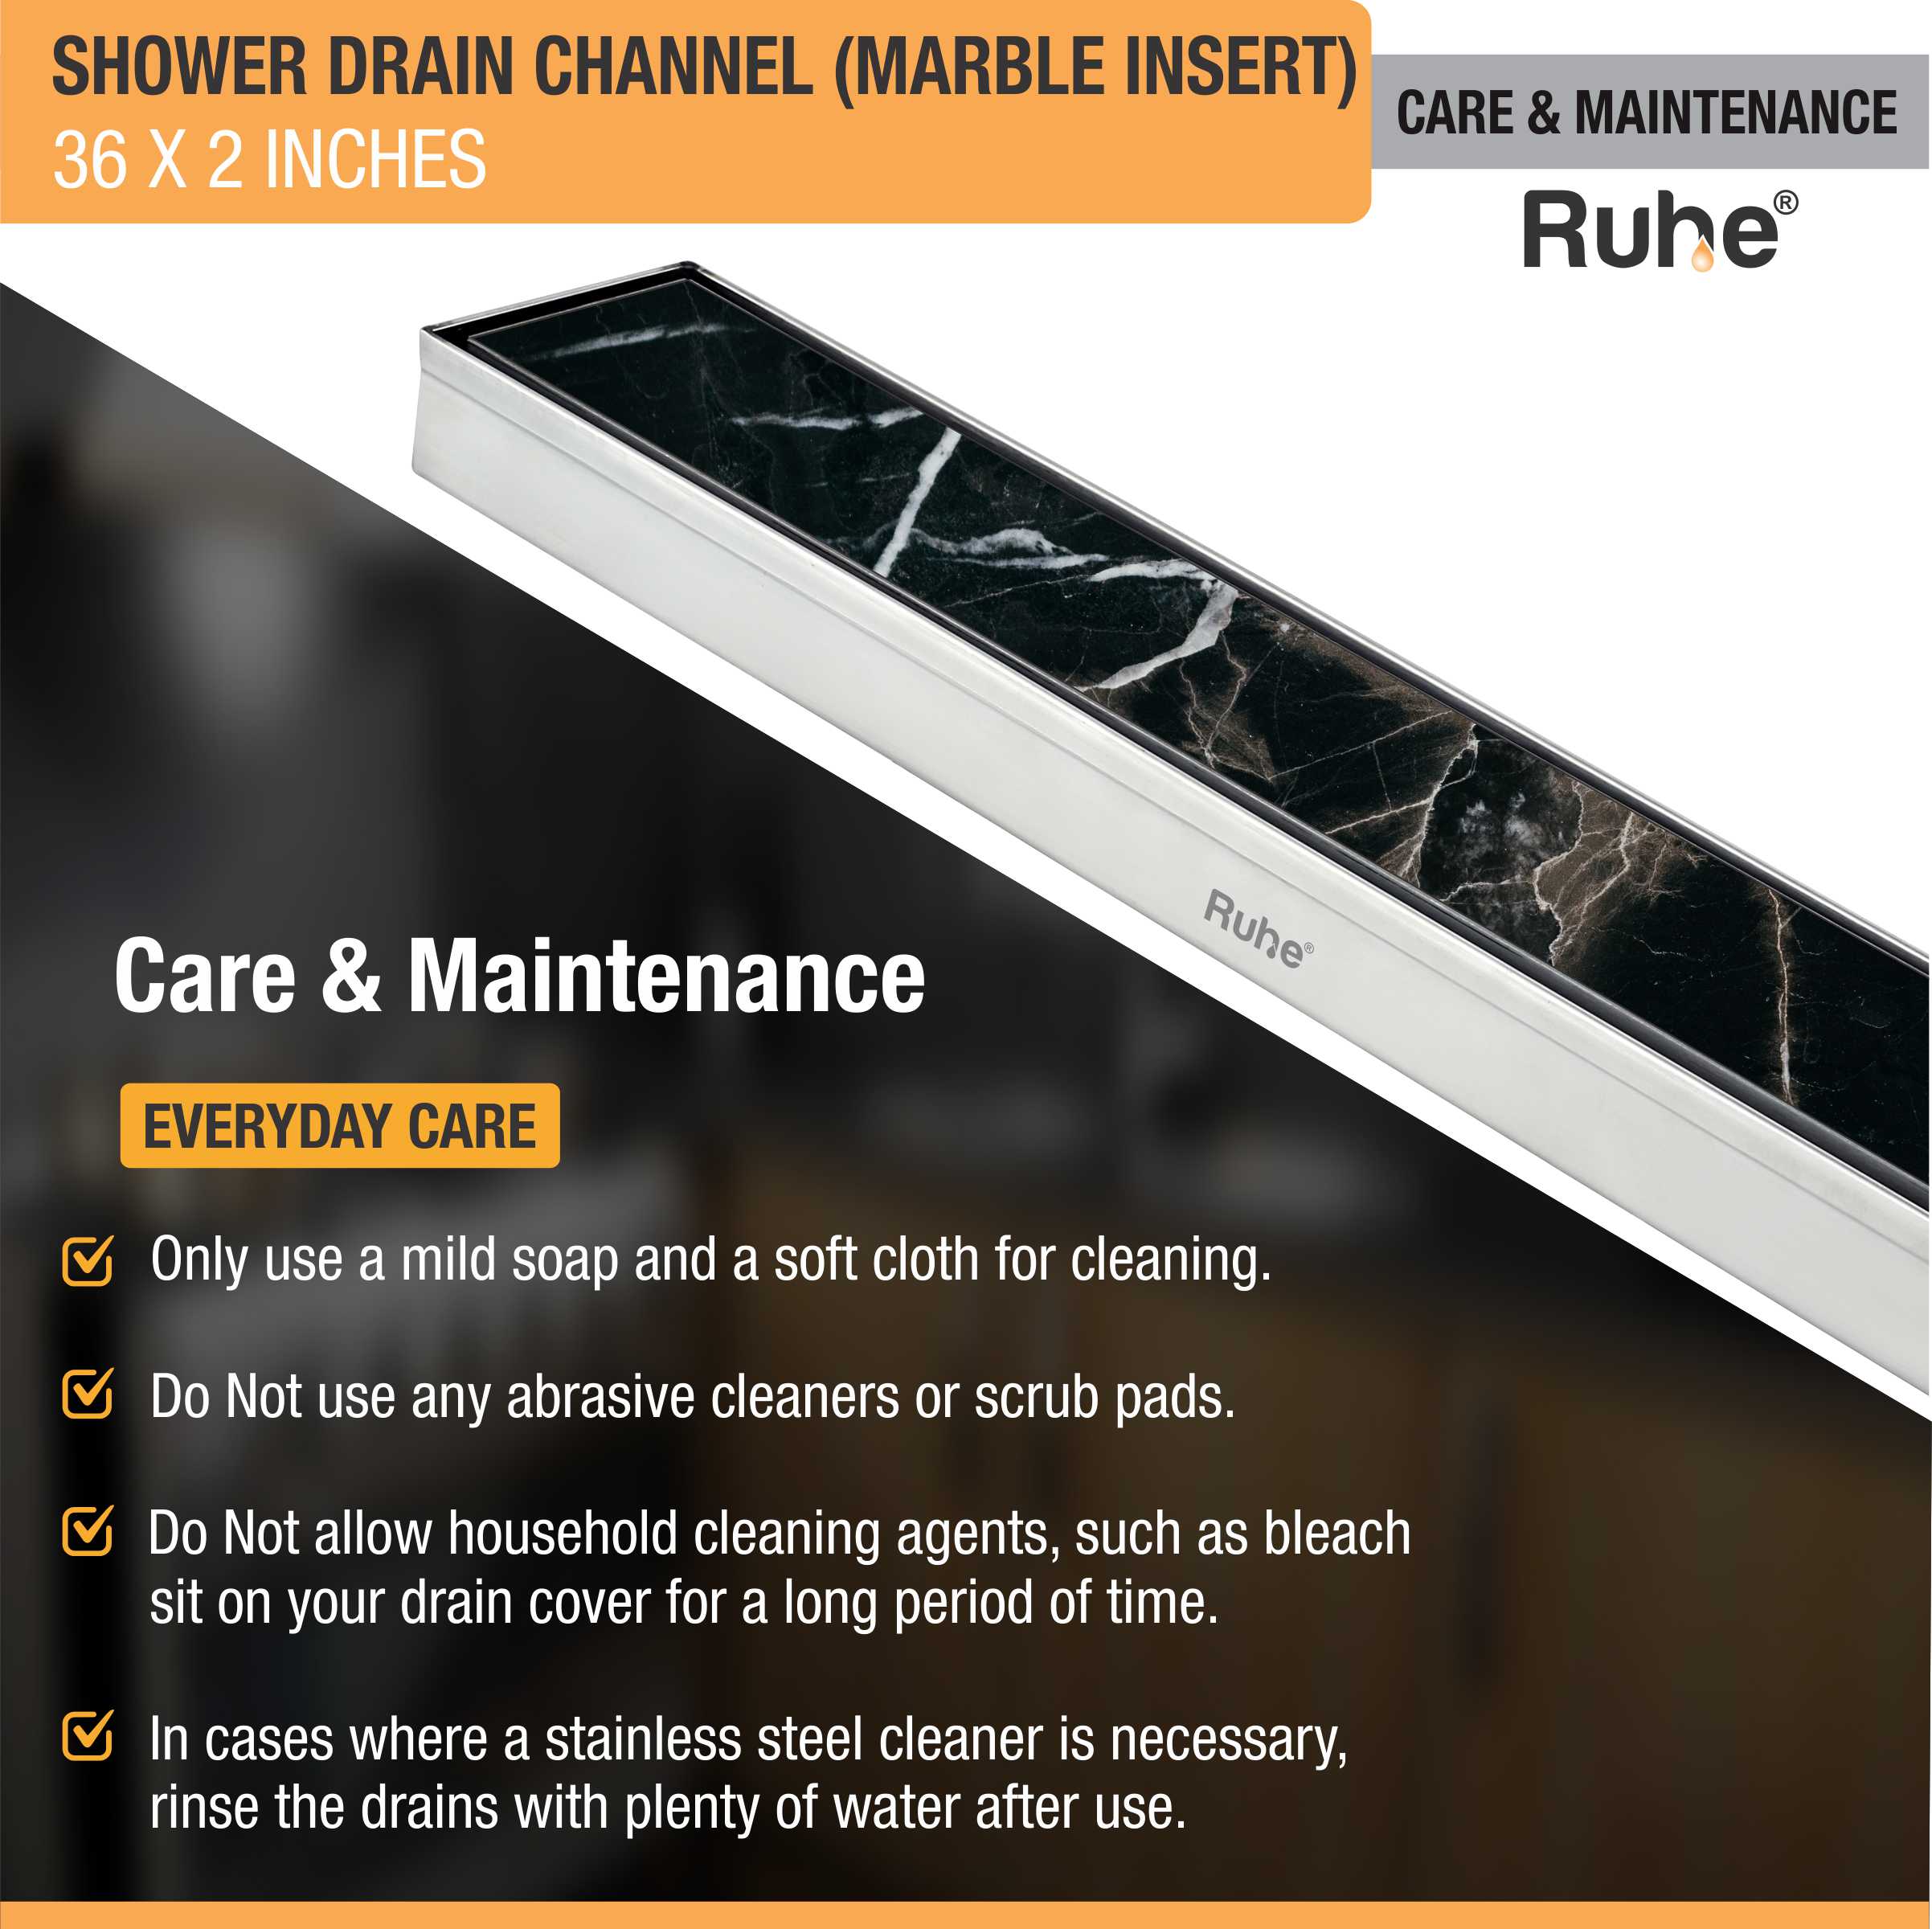 Marble Insert Shower Drain Channel (36 x 2 Inches) (304 Grade) care and maintenance